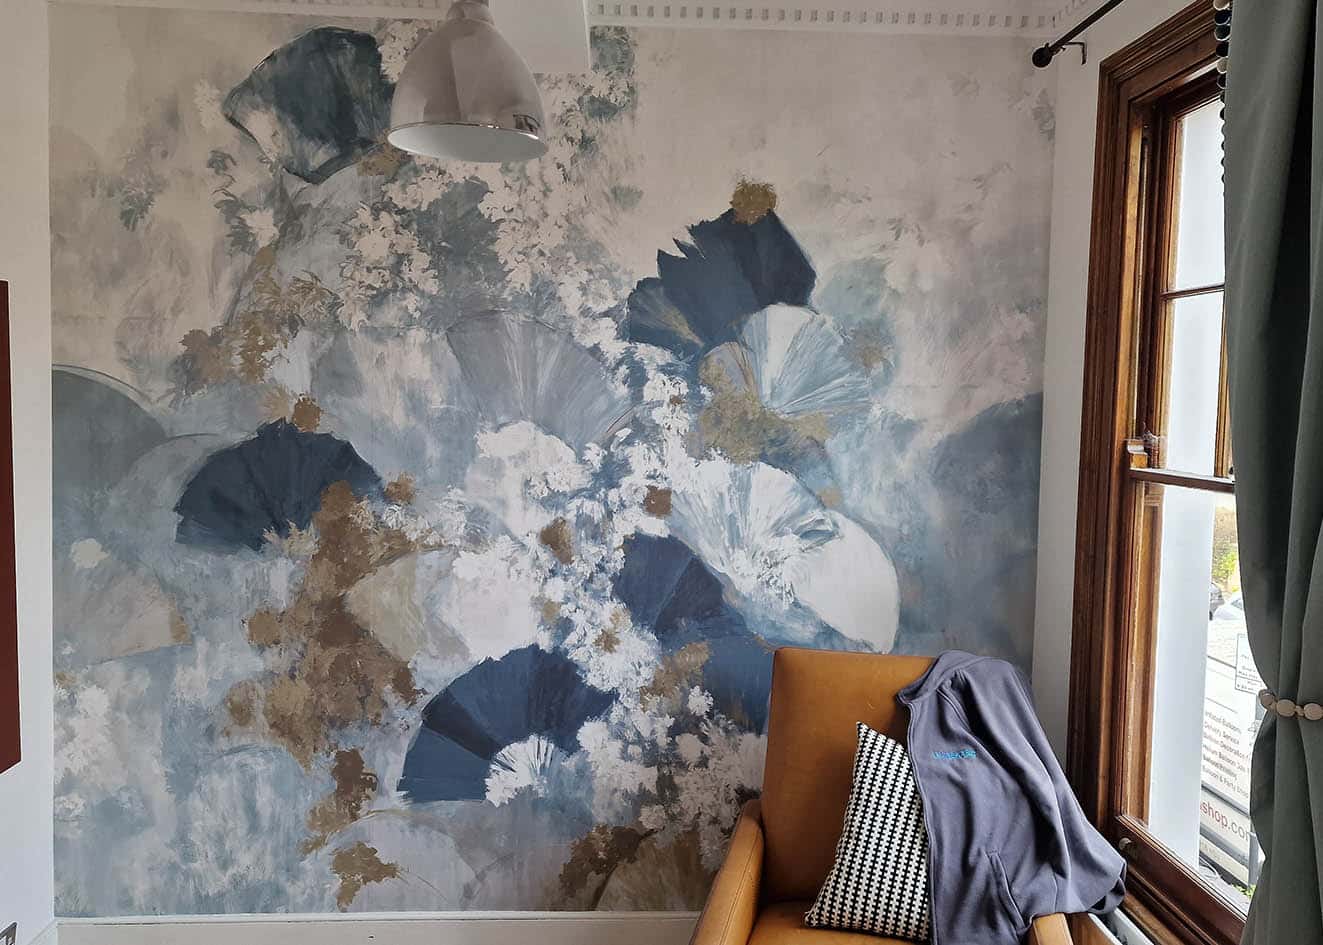 Iizzo wall mural installation. The wall mural is in shades of blue and golden with a large abstract flowers, It is next to a window in a room and there is n armchair in yellow with a Bluespec Decorating Limited logo jacket on it.